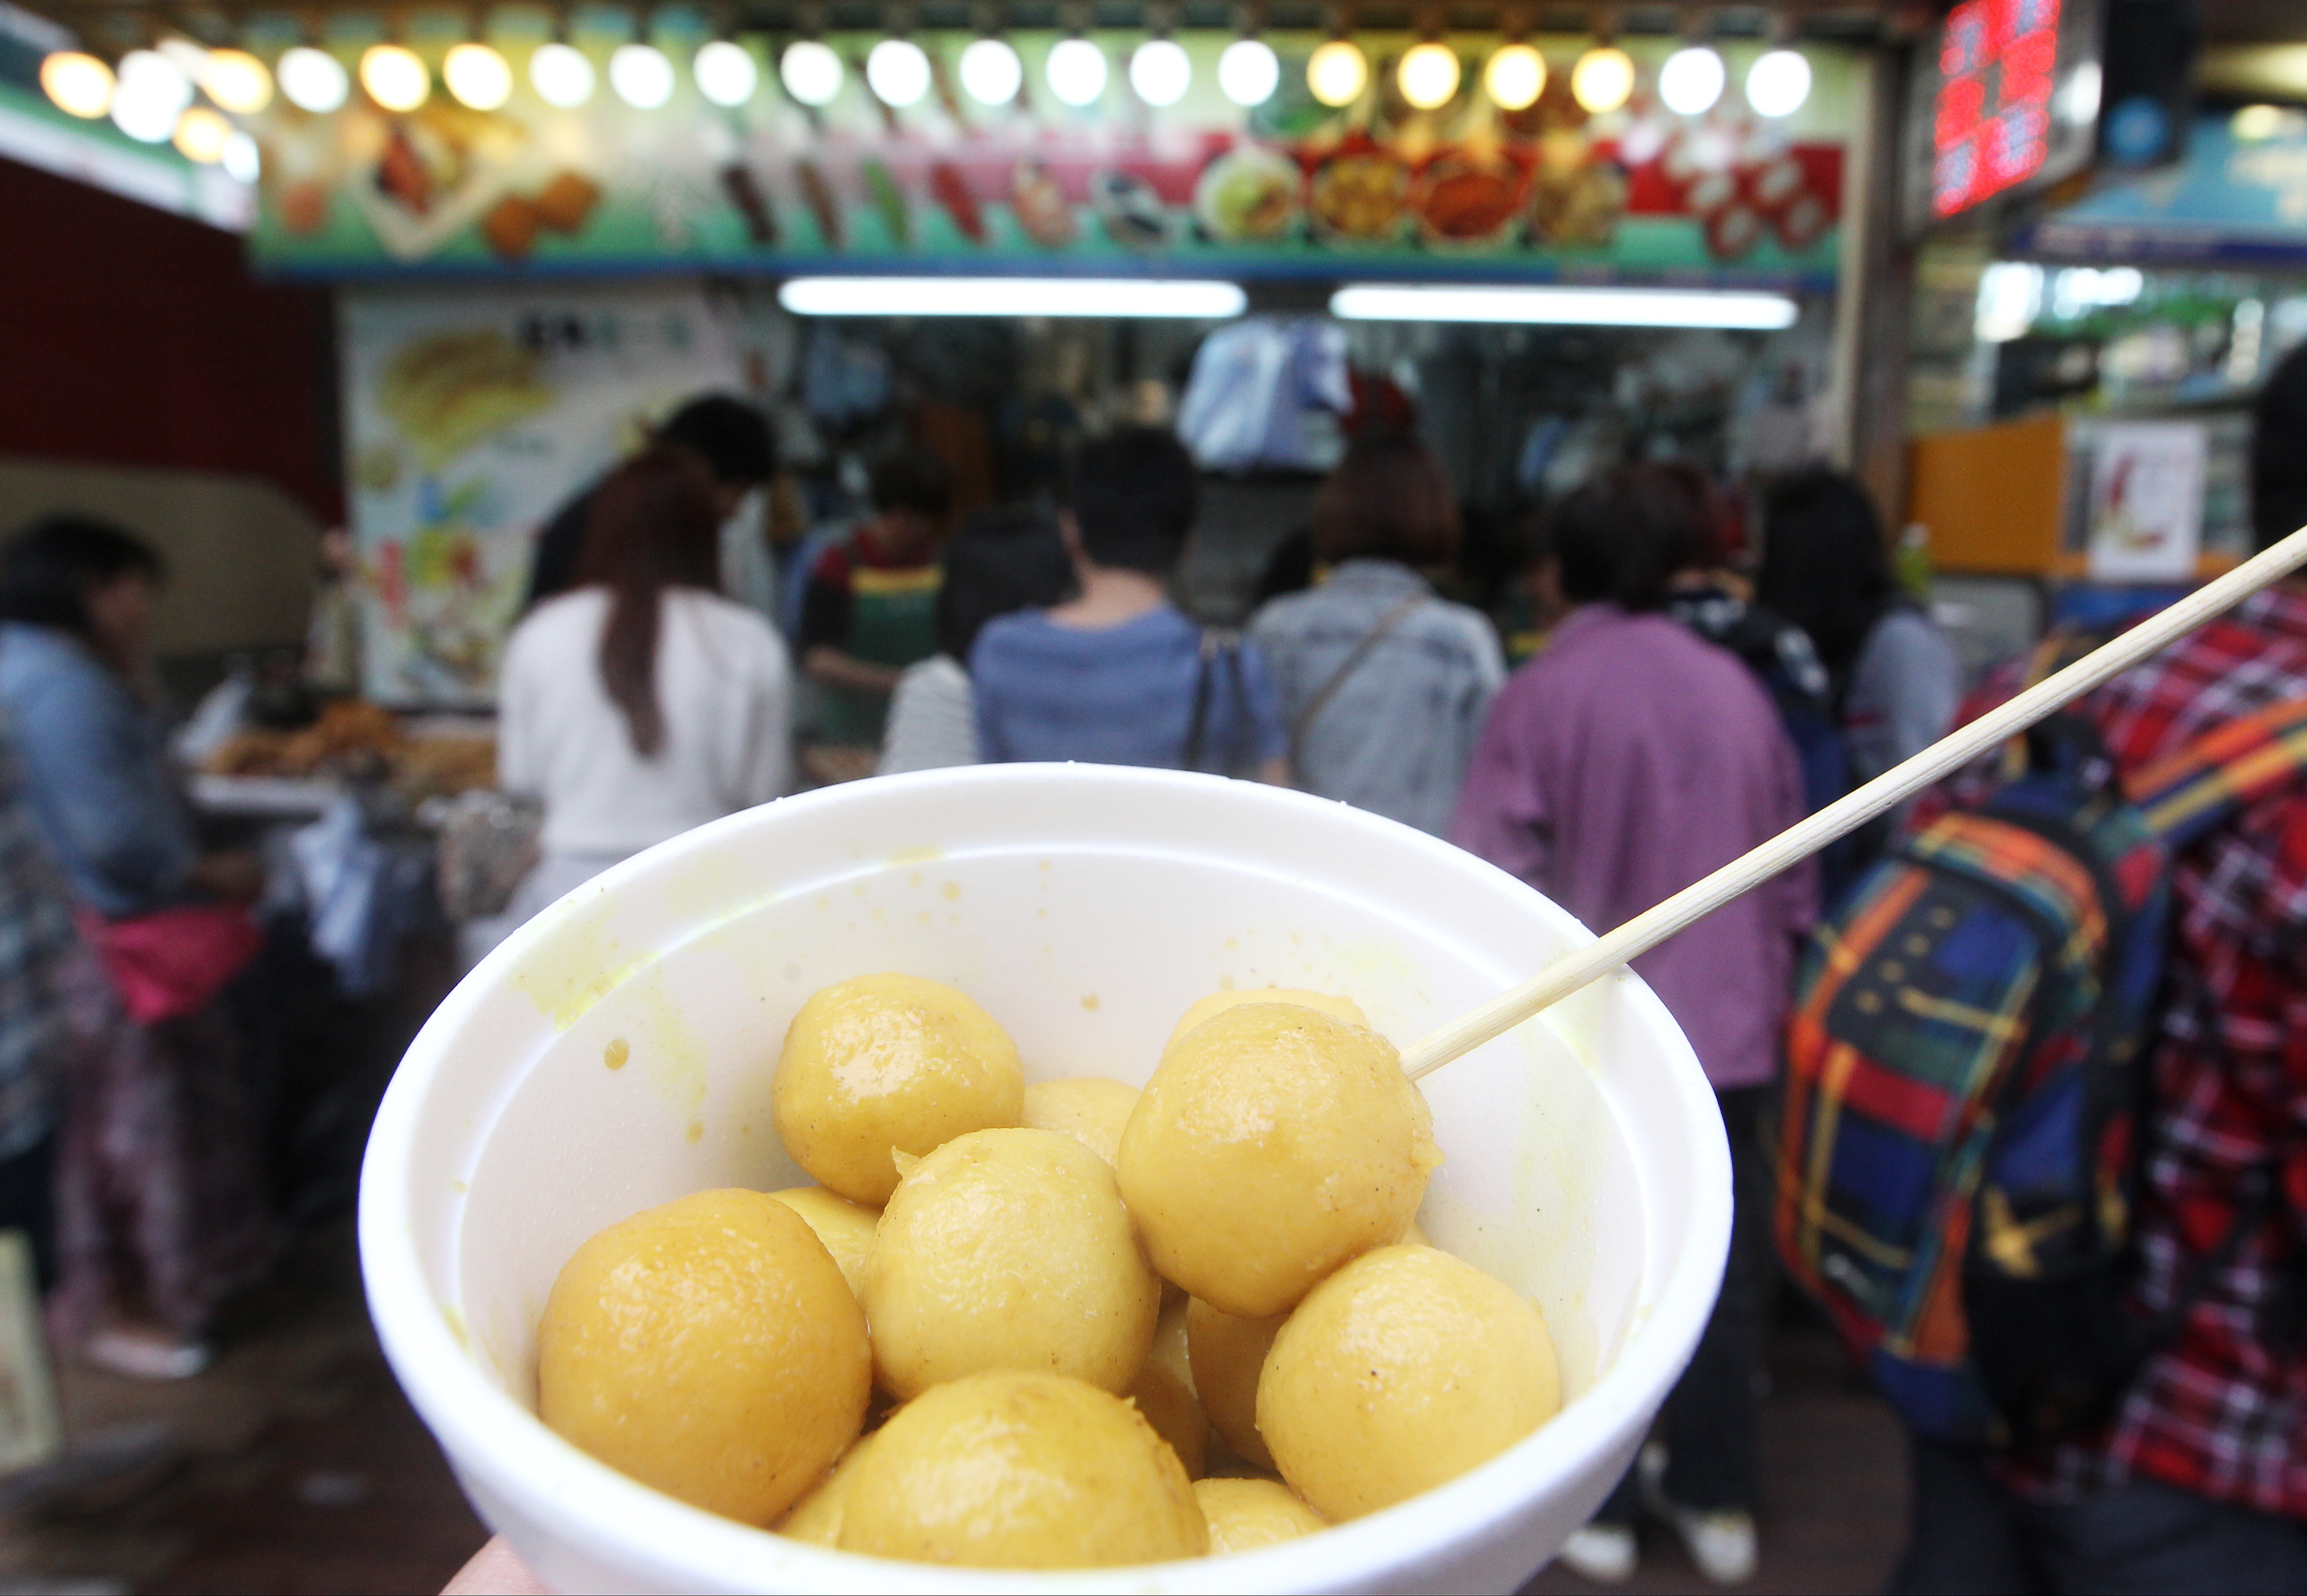 Customers buy fishballs (HK$20 minimum consumption) in a snack shop at the junction of Argyle Street and Portland Street, Mongkok. 07FEB14